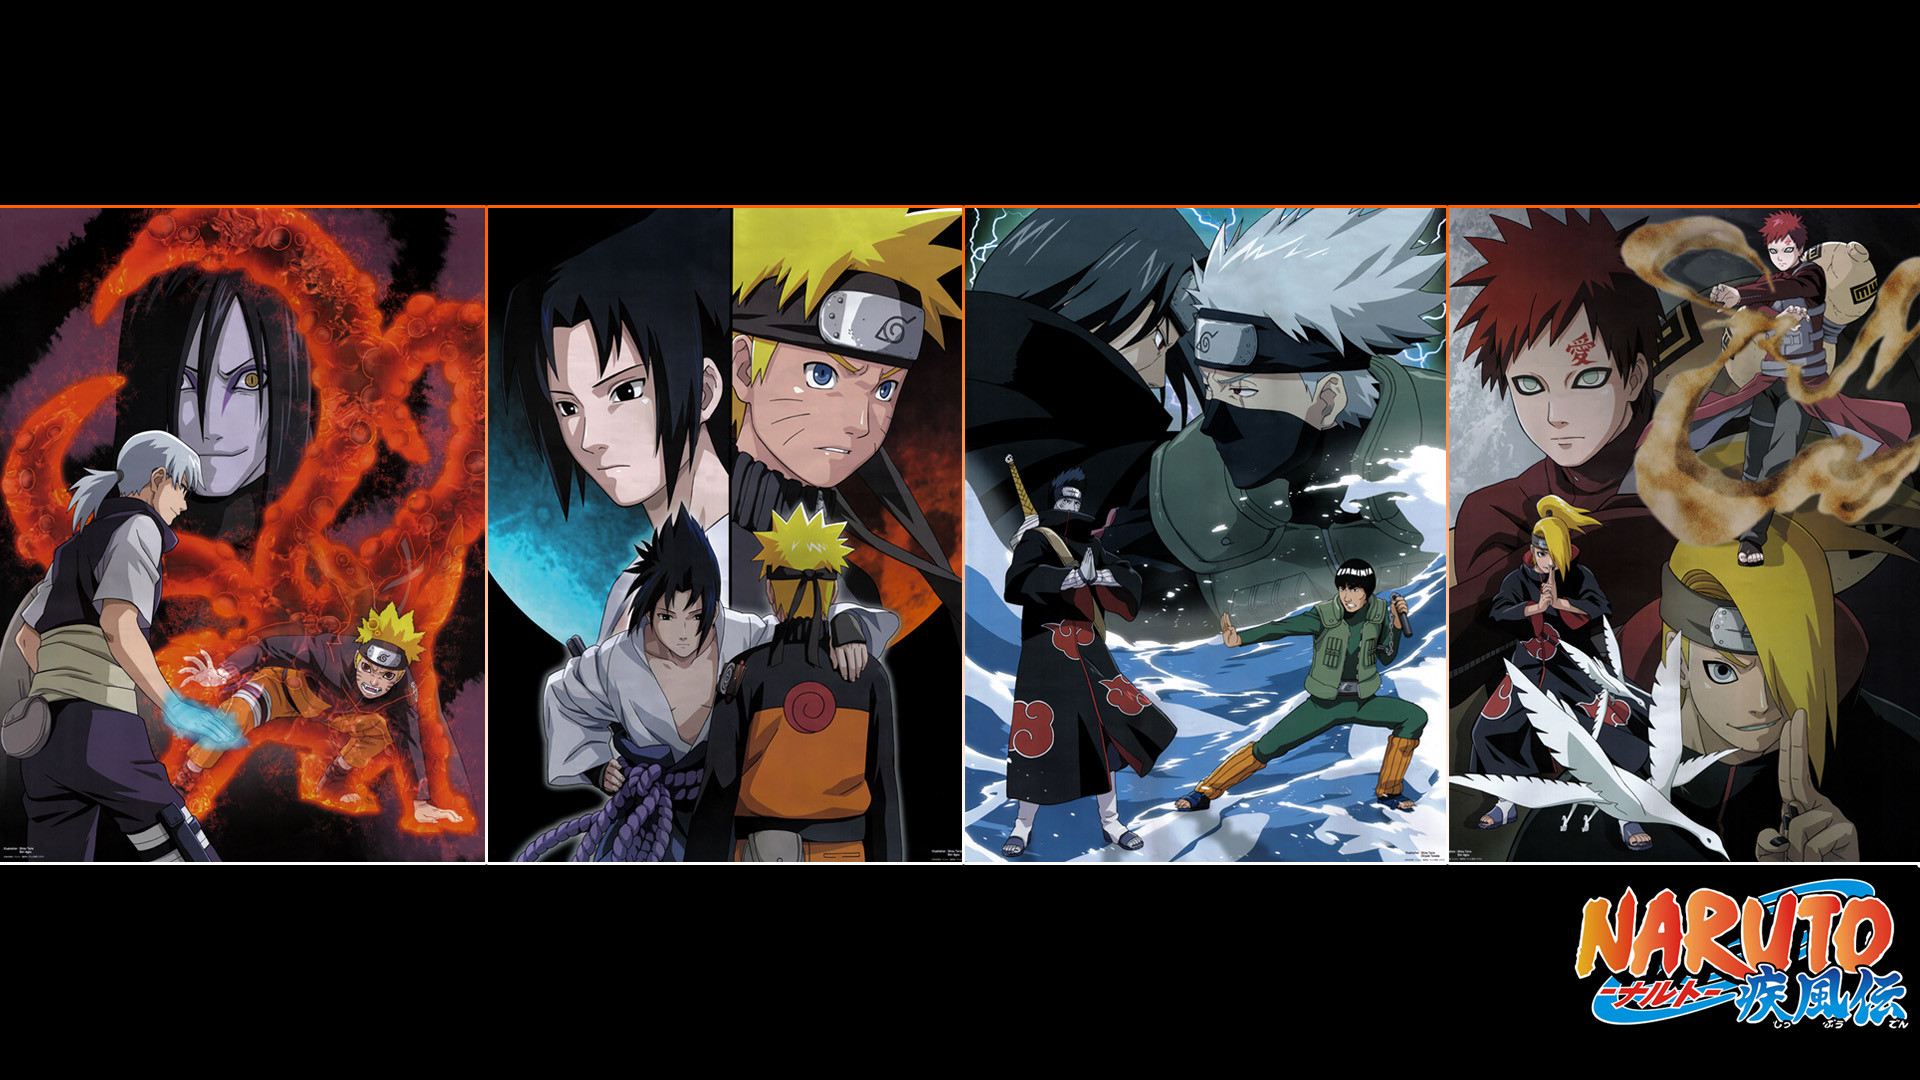 1920x1080 Download Naruto Shippuden Wallpapers On Psp Wallpaper in Pixels 